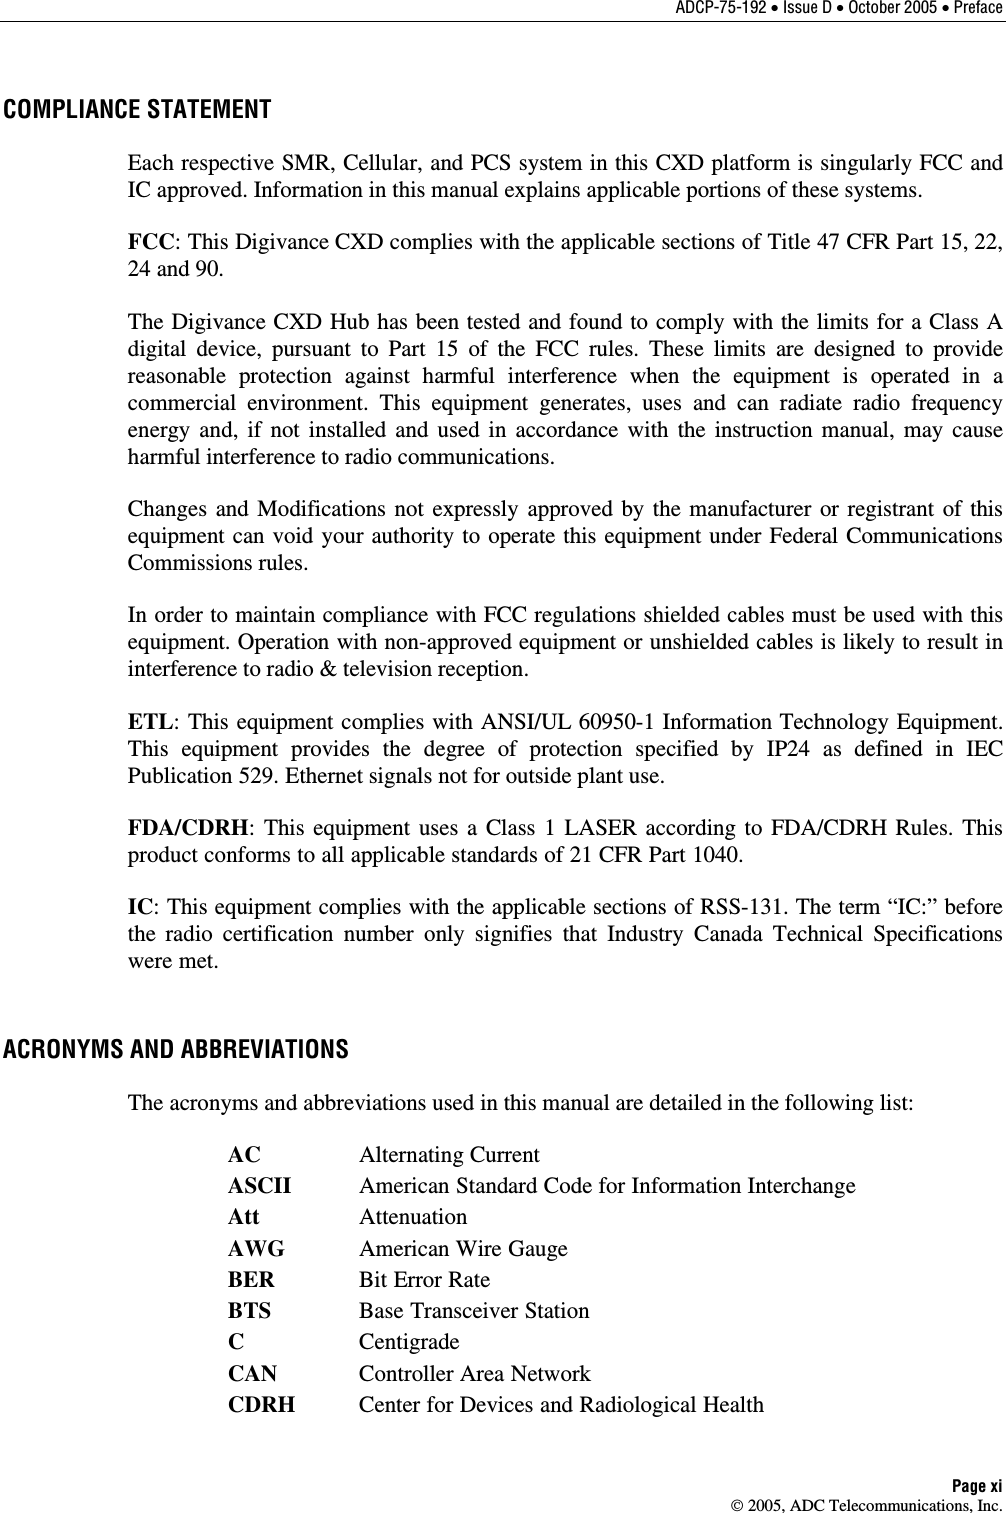 ADCP-75-192 • Issue D • October 2005 • Preface Page xi  2005, ADC Telecommunications, Inc. COMPLIANCE STATEMENT Each respective SMR, Cellular, and PCS system in this CXD platform is singularly FCC and IC approved. Information in this manual explains applicable portions of these systems.  FCC: This Digivance CXD complies with the applicable sections of Title 47 CFR Part 15, 22, 24 and 90.  The Digivance CXD Hub has been tested and found to comply with the limits for a Class A digital device, pursuant to Part 15 of the FCC rules. These limits are designed to provide reasonable protection against harmful interference when the equipment is operated in a commercial environment. This equipment generates, uses and can radiate radio frequency energy and, if not installed and used in accordance with the instruction manual, may cause harmful interference to radio communications.  Changes and Modifications not expressly approved by the manufacturer or registrant of this equipment can void your authority to operate this equipment under Federal Communications Commissions rules. In order to maintain compliance with FCC regulations shielded cables must be used with this equipment. Operation with non-approved equipment or unshielded cables is likely to result in interference to radio &amp; television reception. ETL: This equipment complies with ANSI/UL 60950-1 Information Technology Equipment. This equipment provides the degree of protection specified by IP24 as defined in IEC Publication 529. Ethernet signals not for outside plant use. FDA/CDRH: This equipment uses a Class 1 LASER according to FDA/CDRH Rules. This product conforms to all applicable standards of 21 CFR Part 1040.  IC: This equipment complies with the applicable sections of RSS-131. The term “IC:” before the radio certification number only signifies that Industry Canada Technical Specifications were met. ACRONYMS AND ABBREVIATIONS The acronyms and abbreviations used in this manual are detailed in the following list:  AC Alternating Current  ASCII American Standard Code for Information Interchange  Att Attenuation  AWG American Wire Gauge  BER Bit Error Rate  BTS Base Transceiver Station  C  Centigrade  CAN Controller Area Network  CDRH  Center for Devices and Radiological Health 